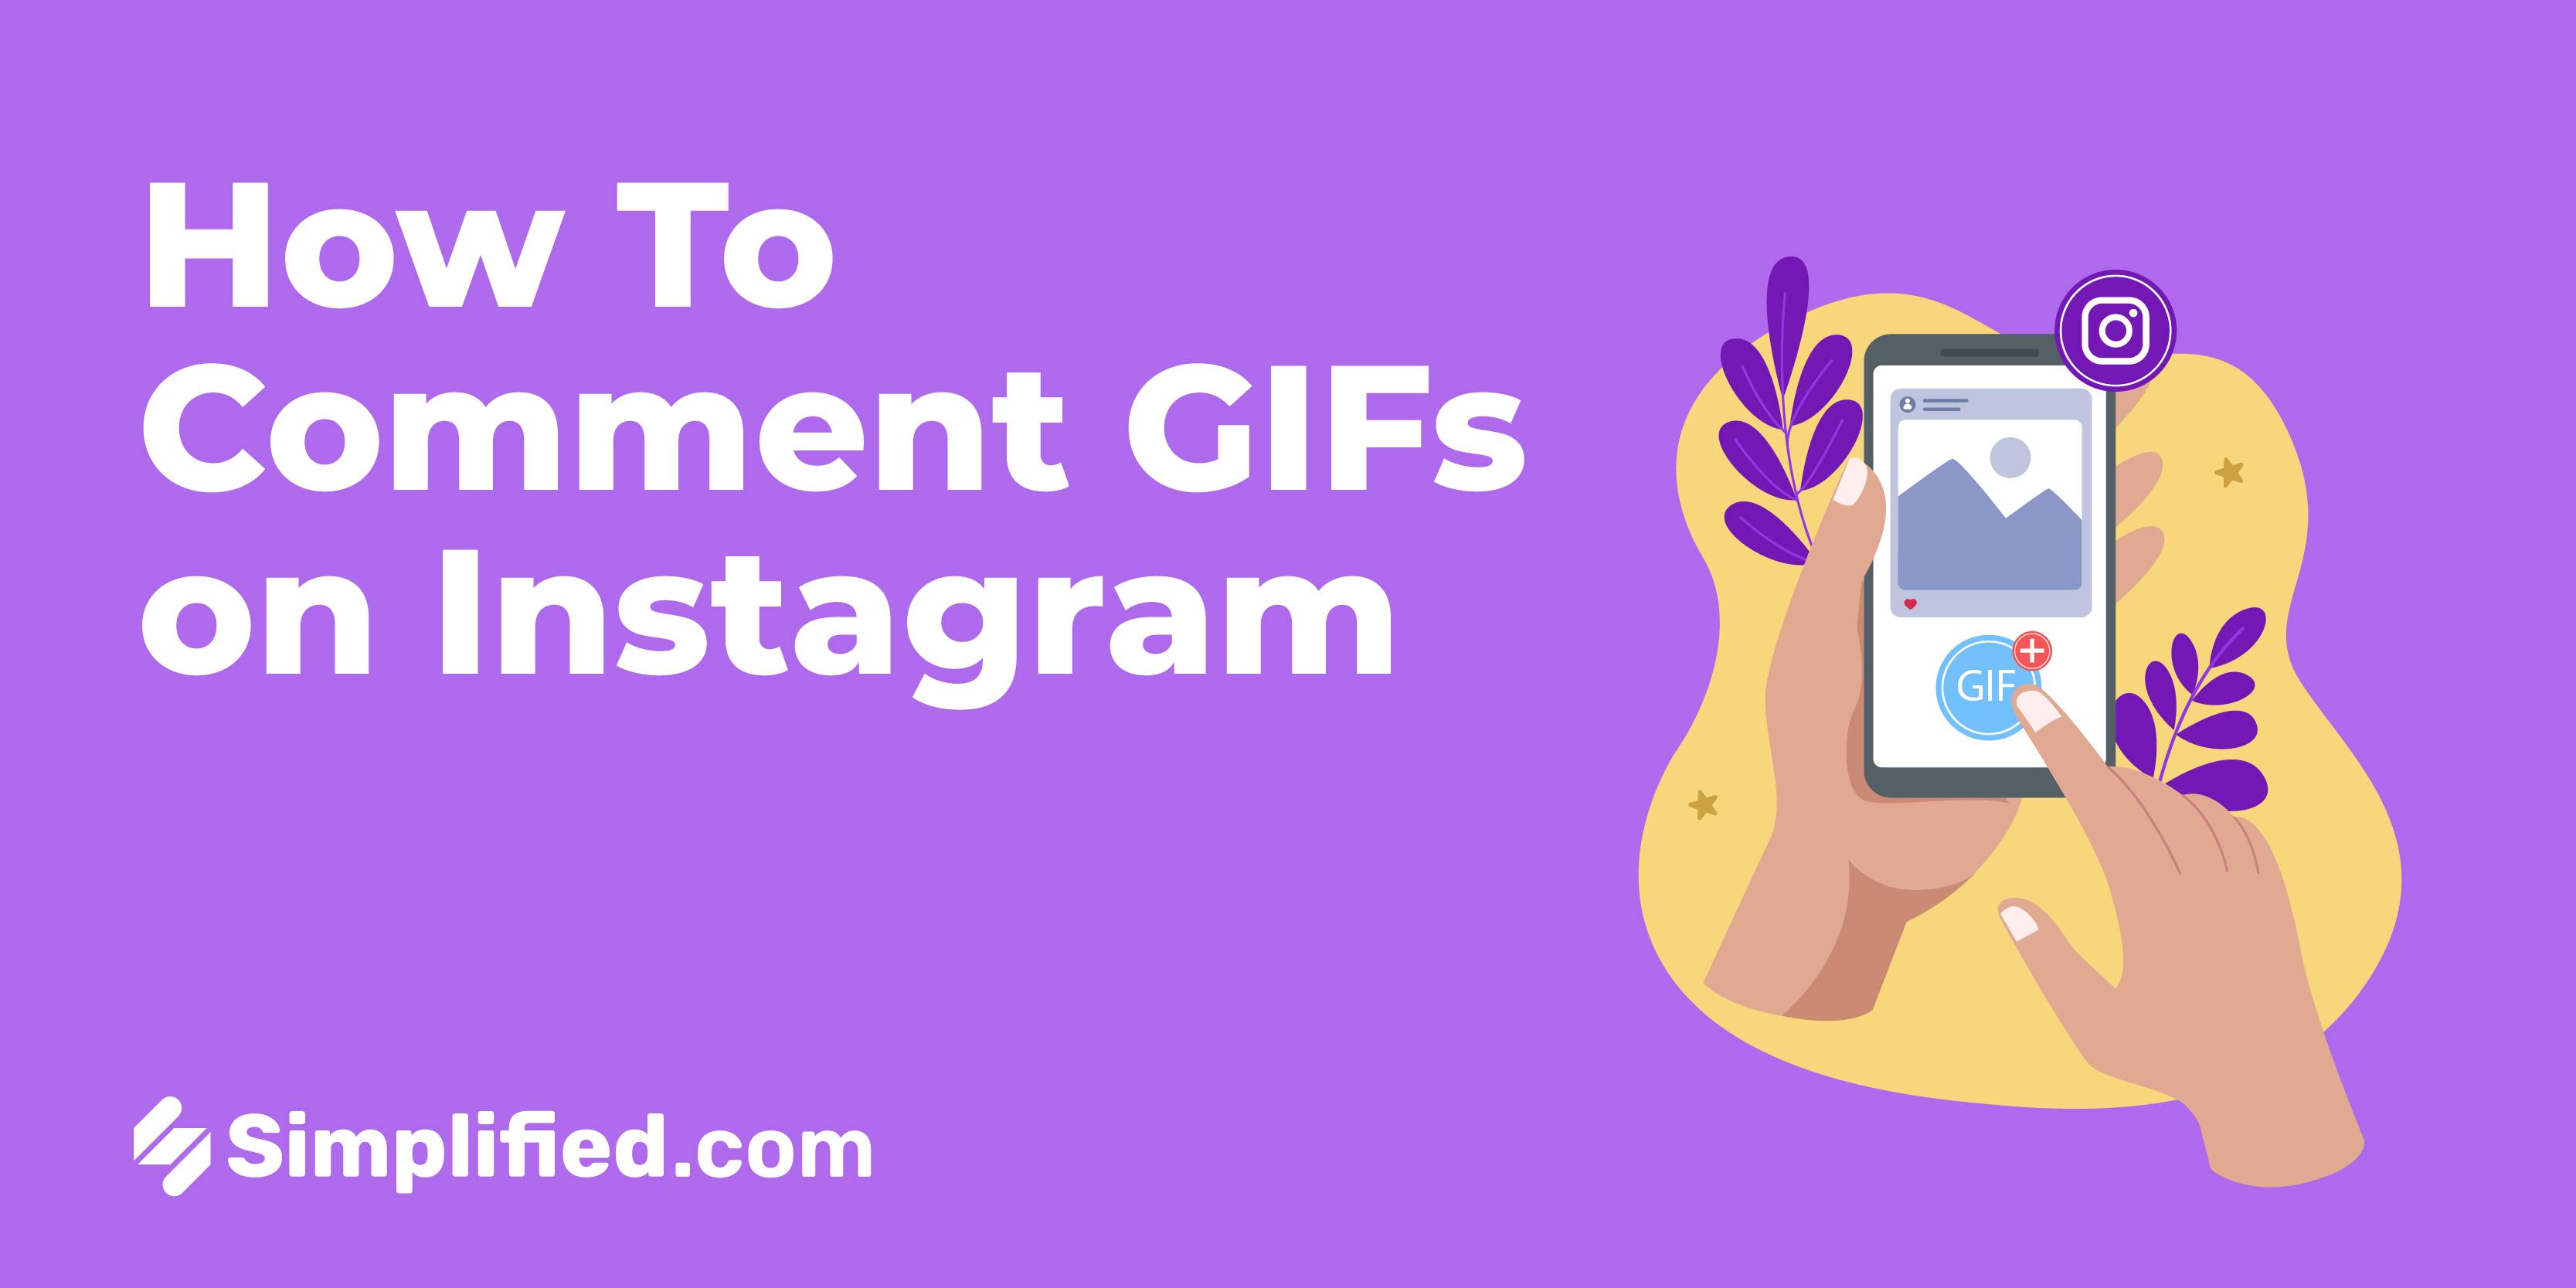 5 Essential Funny Memes Instagram Templates Funny Gifs 